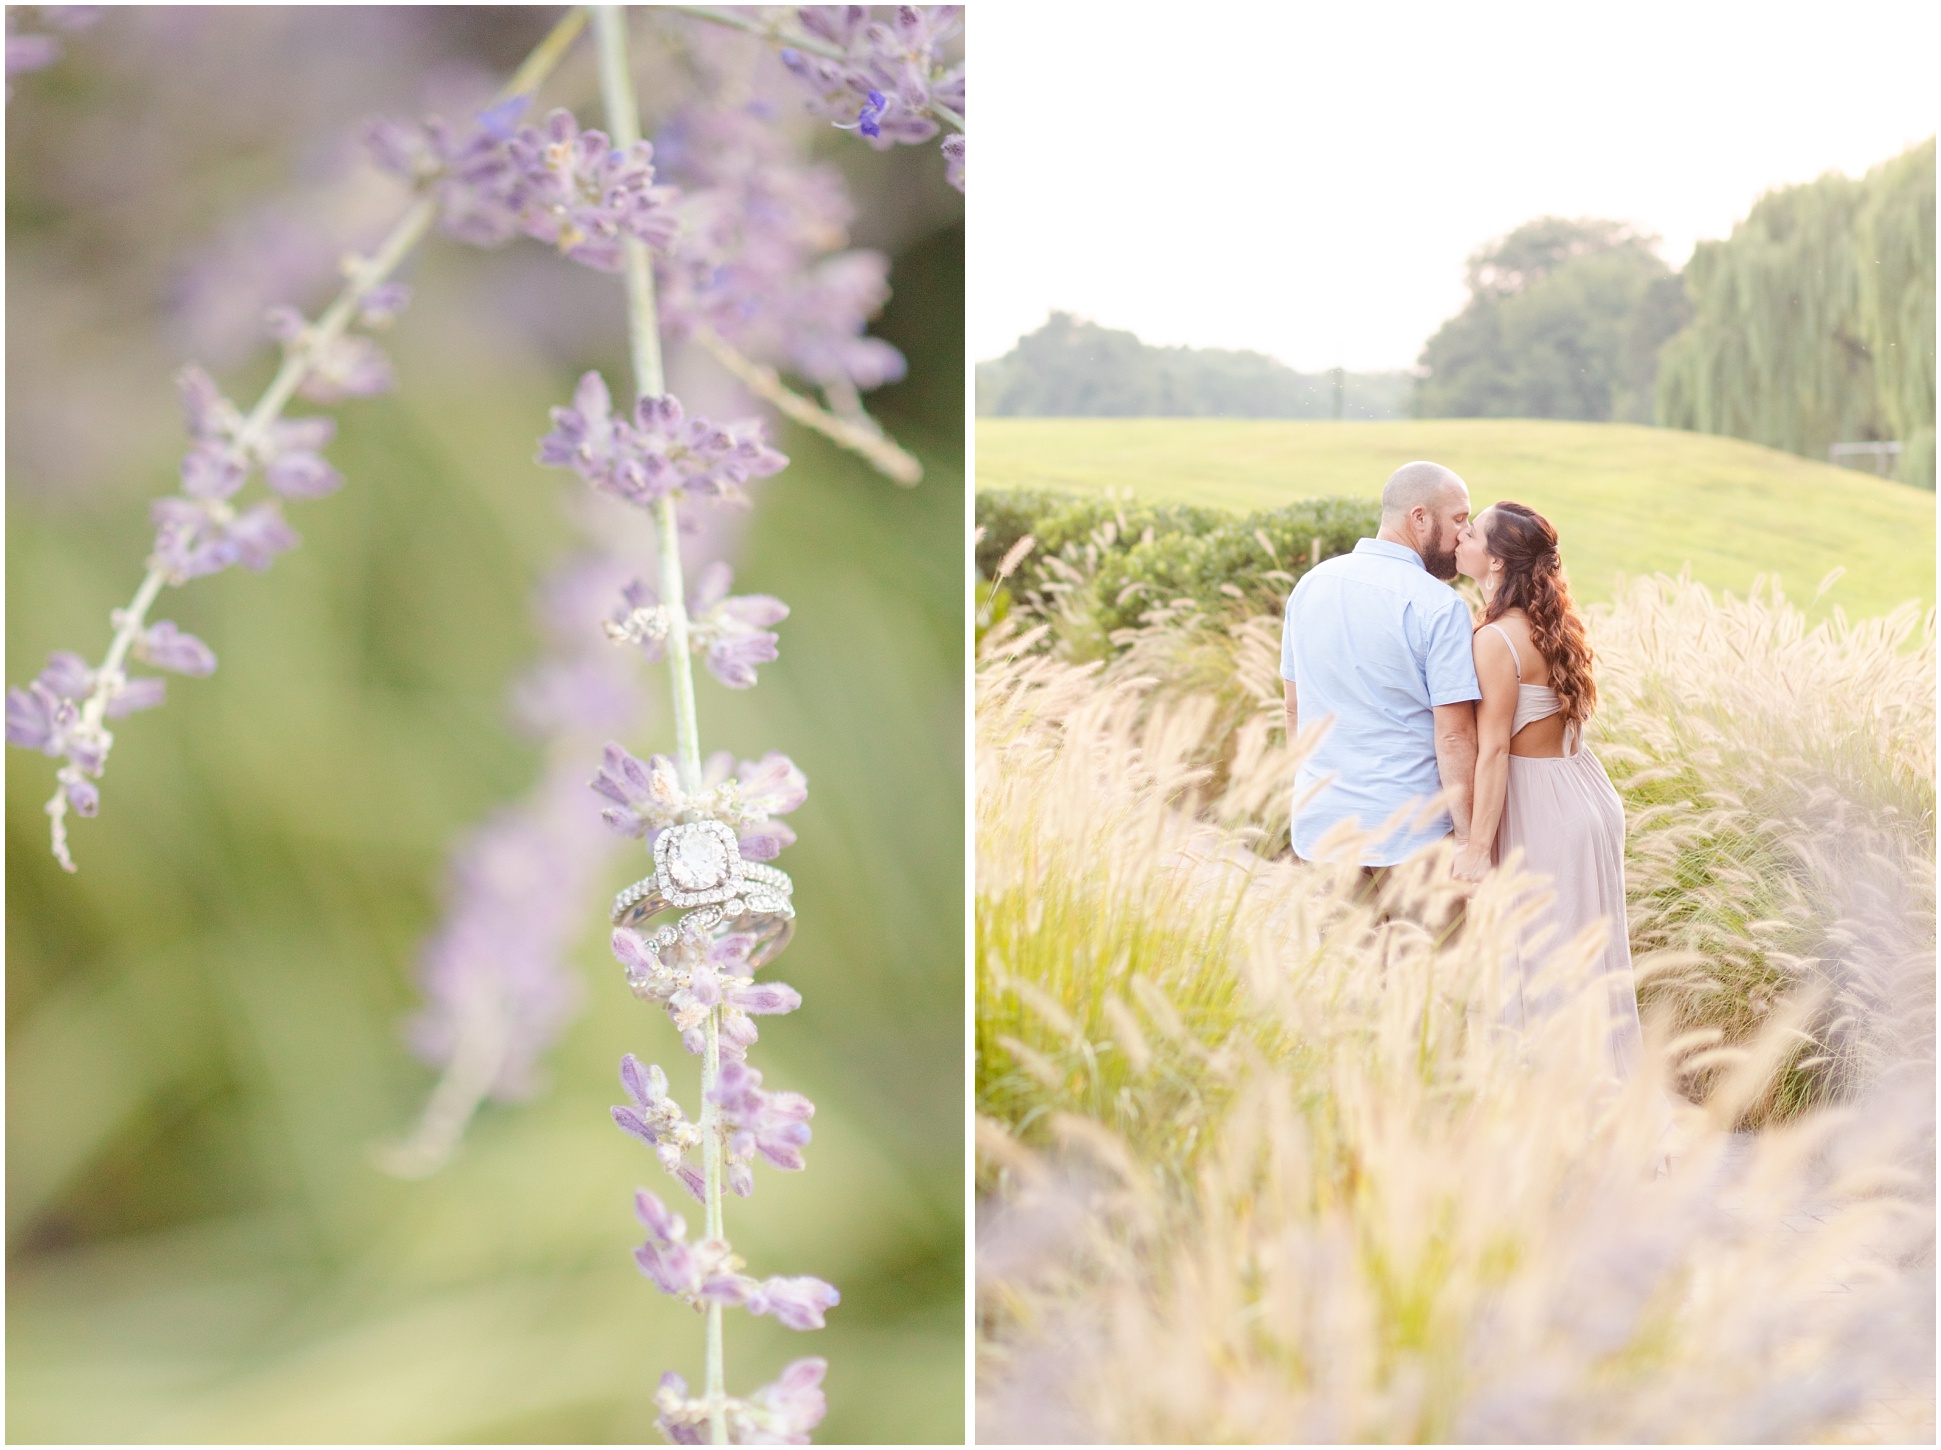 Left: Engagement ring shot on lavender branch, right: husband and wife to be kissing among the lavender flowers